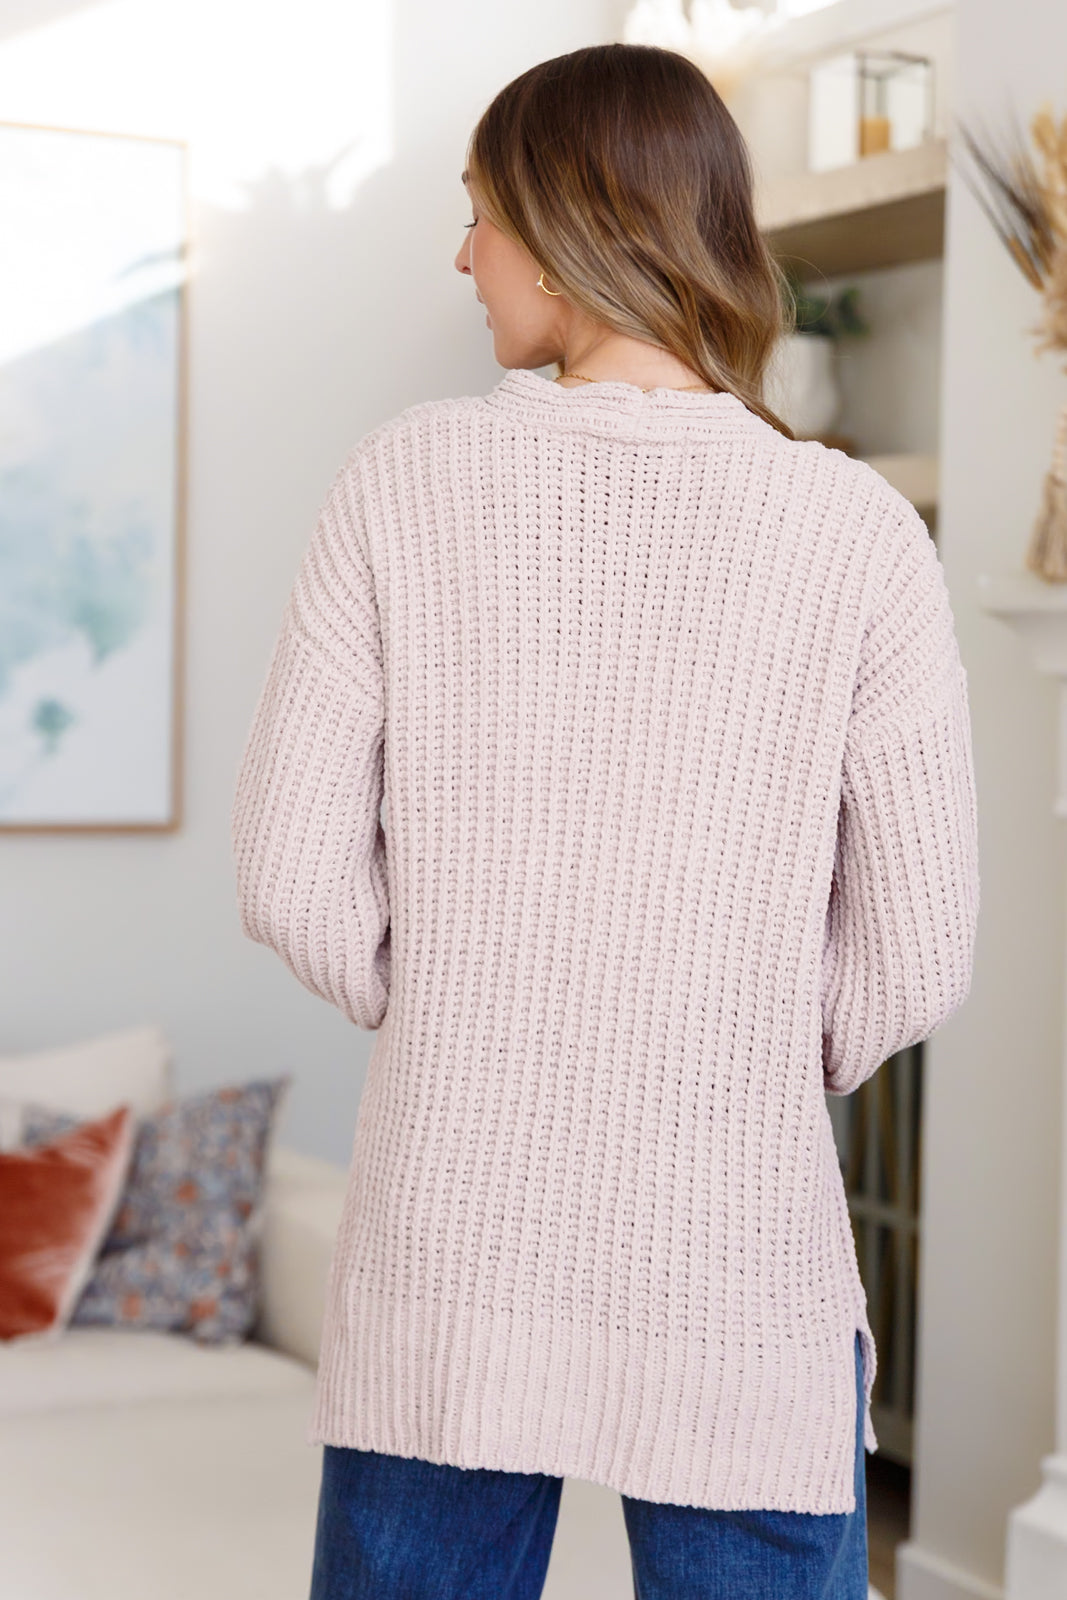 Wrap yourself in the comfort of our Mother Knows Best Buttoned Down Cardigan. This mid-weight sweater knit features a flattering v-neckline, drop shoulder design, and front button closures. Dress it up or down for any occasion, and experience the soft and warm feel of this versatile layer. Mother approved!  S - 3X